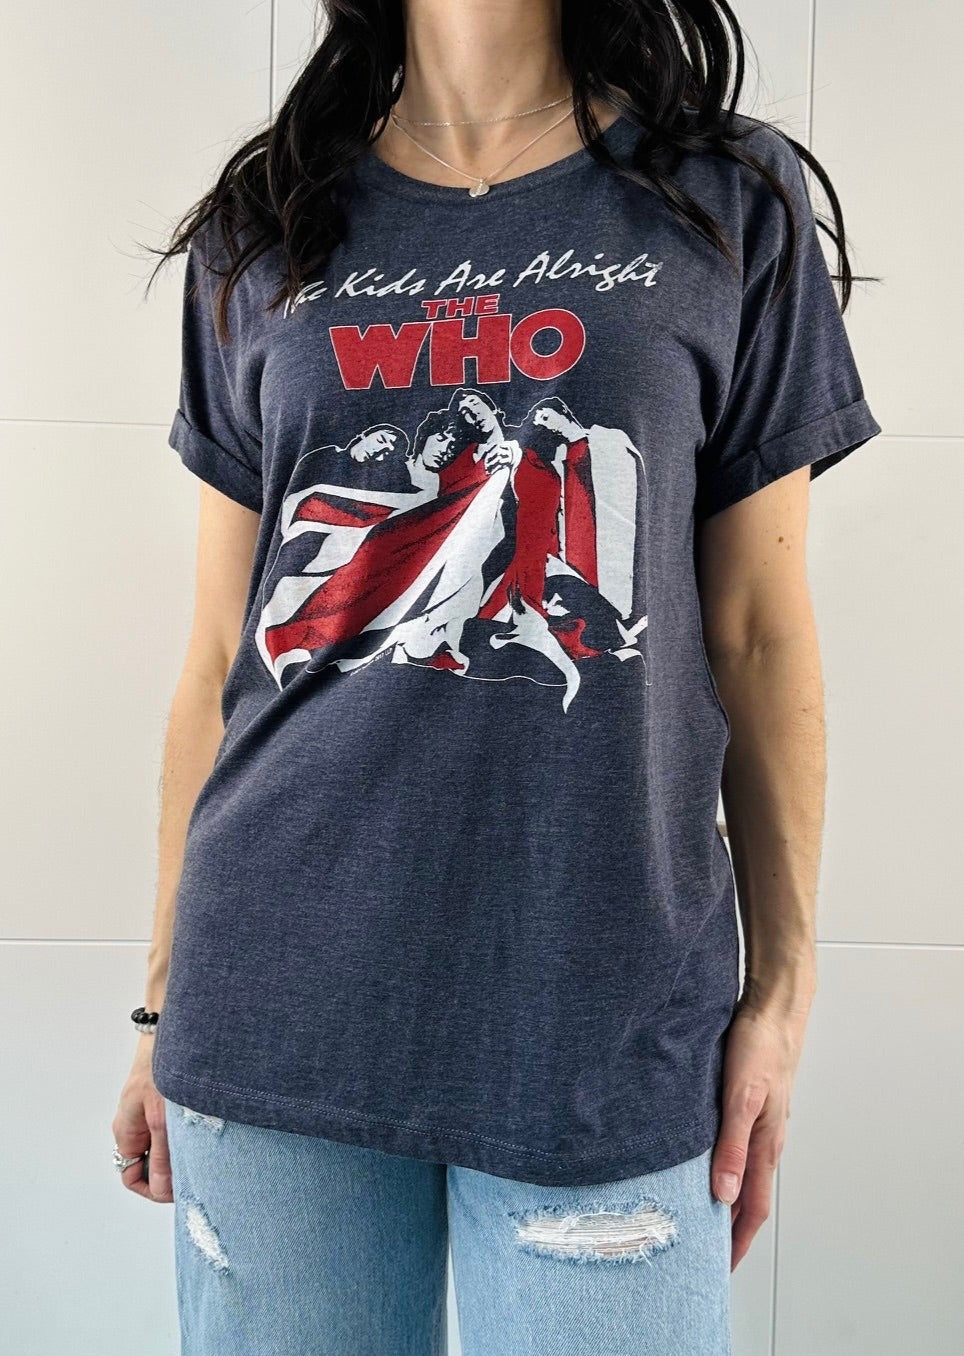 THE WHO - THE KIDS ARE ALRIGHT TEE